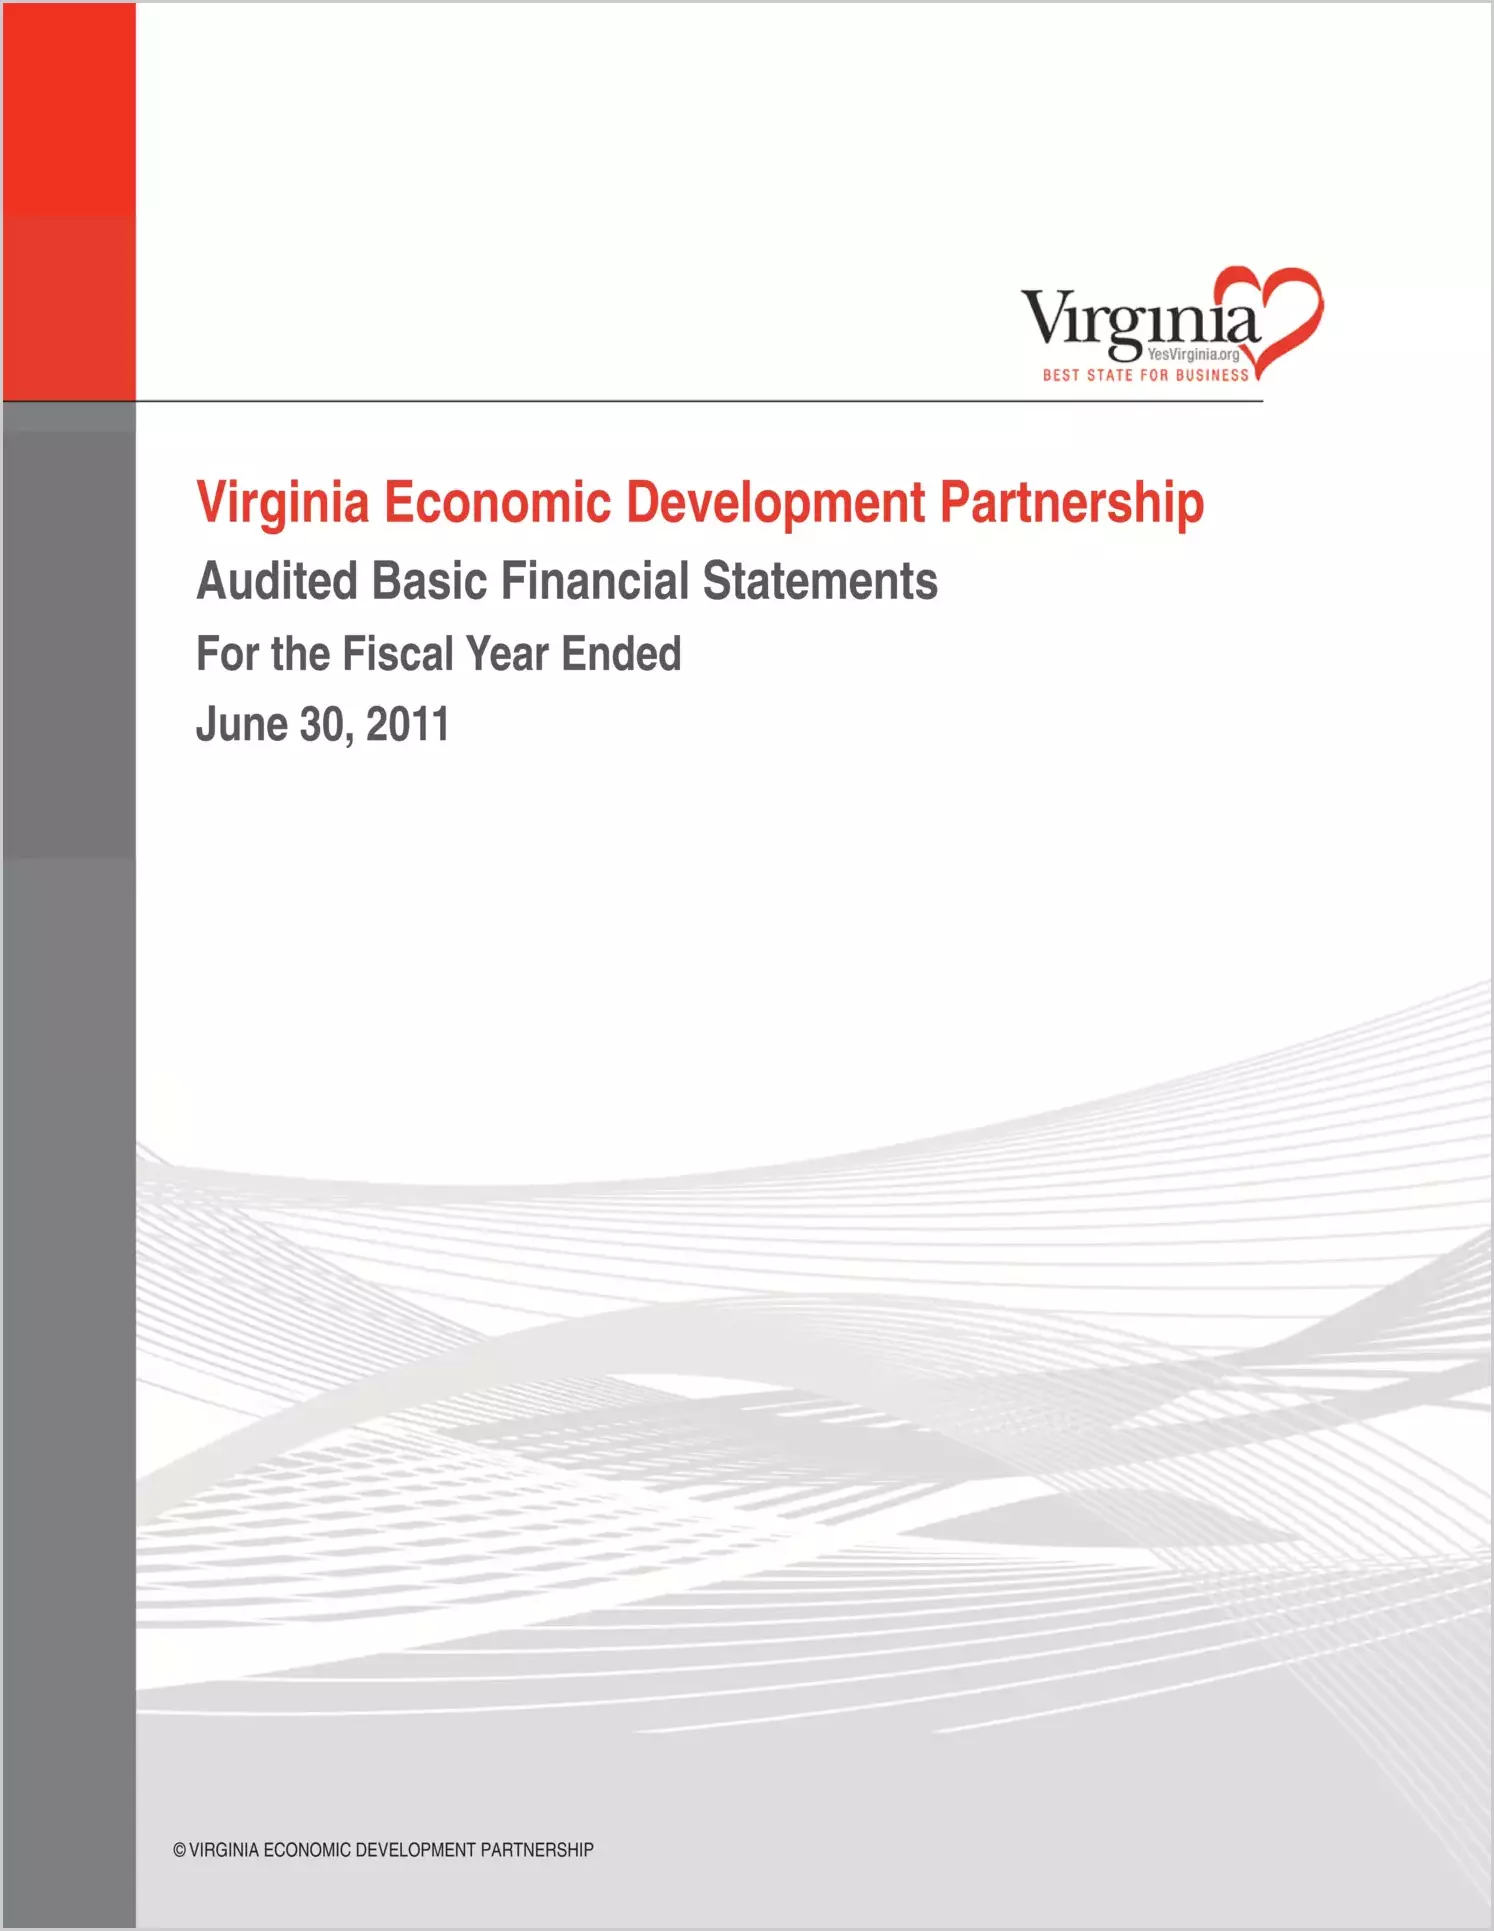 Virginia Economic Development Partnership Financial Statements Report for the year ended June 30, 2011